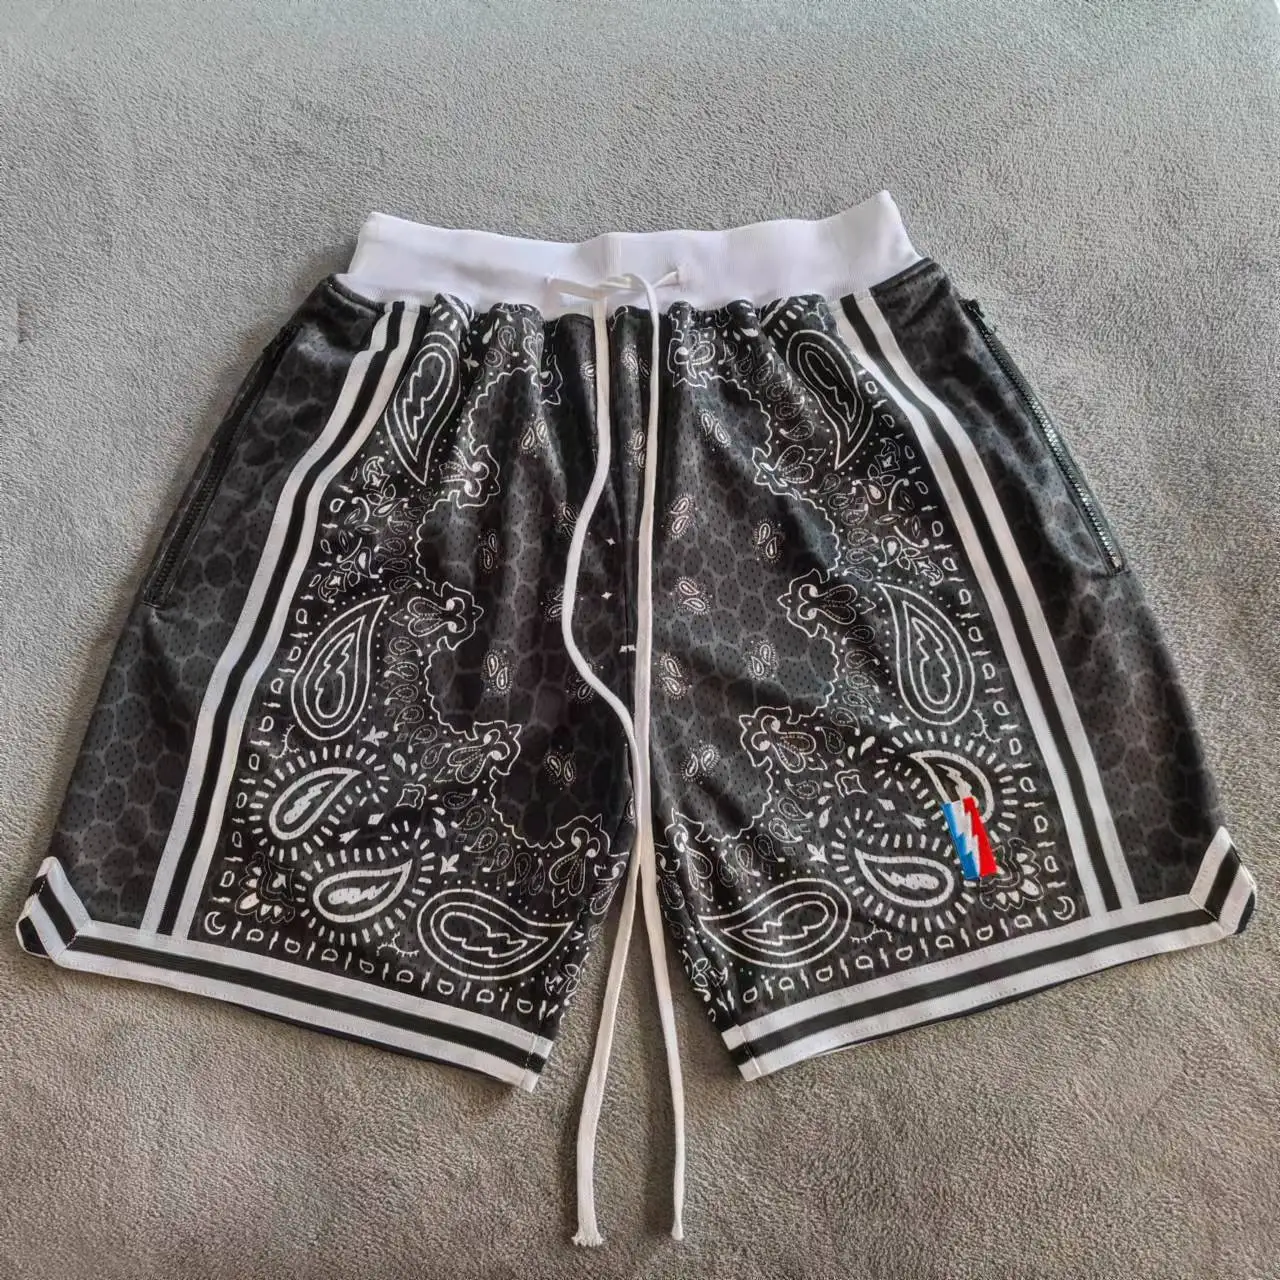 TRILLEST Los Angeles Style Black Paisley Printed Basketball Shorts with Zipper Pockets Bryant LeBron Street Wear Training Pants